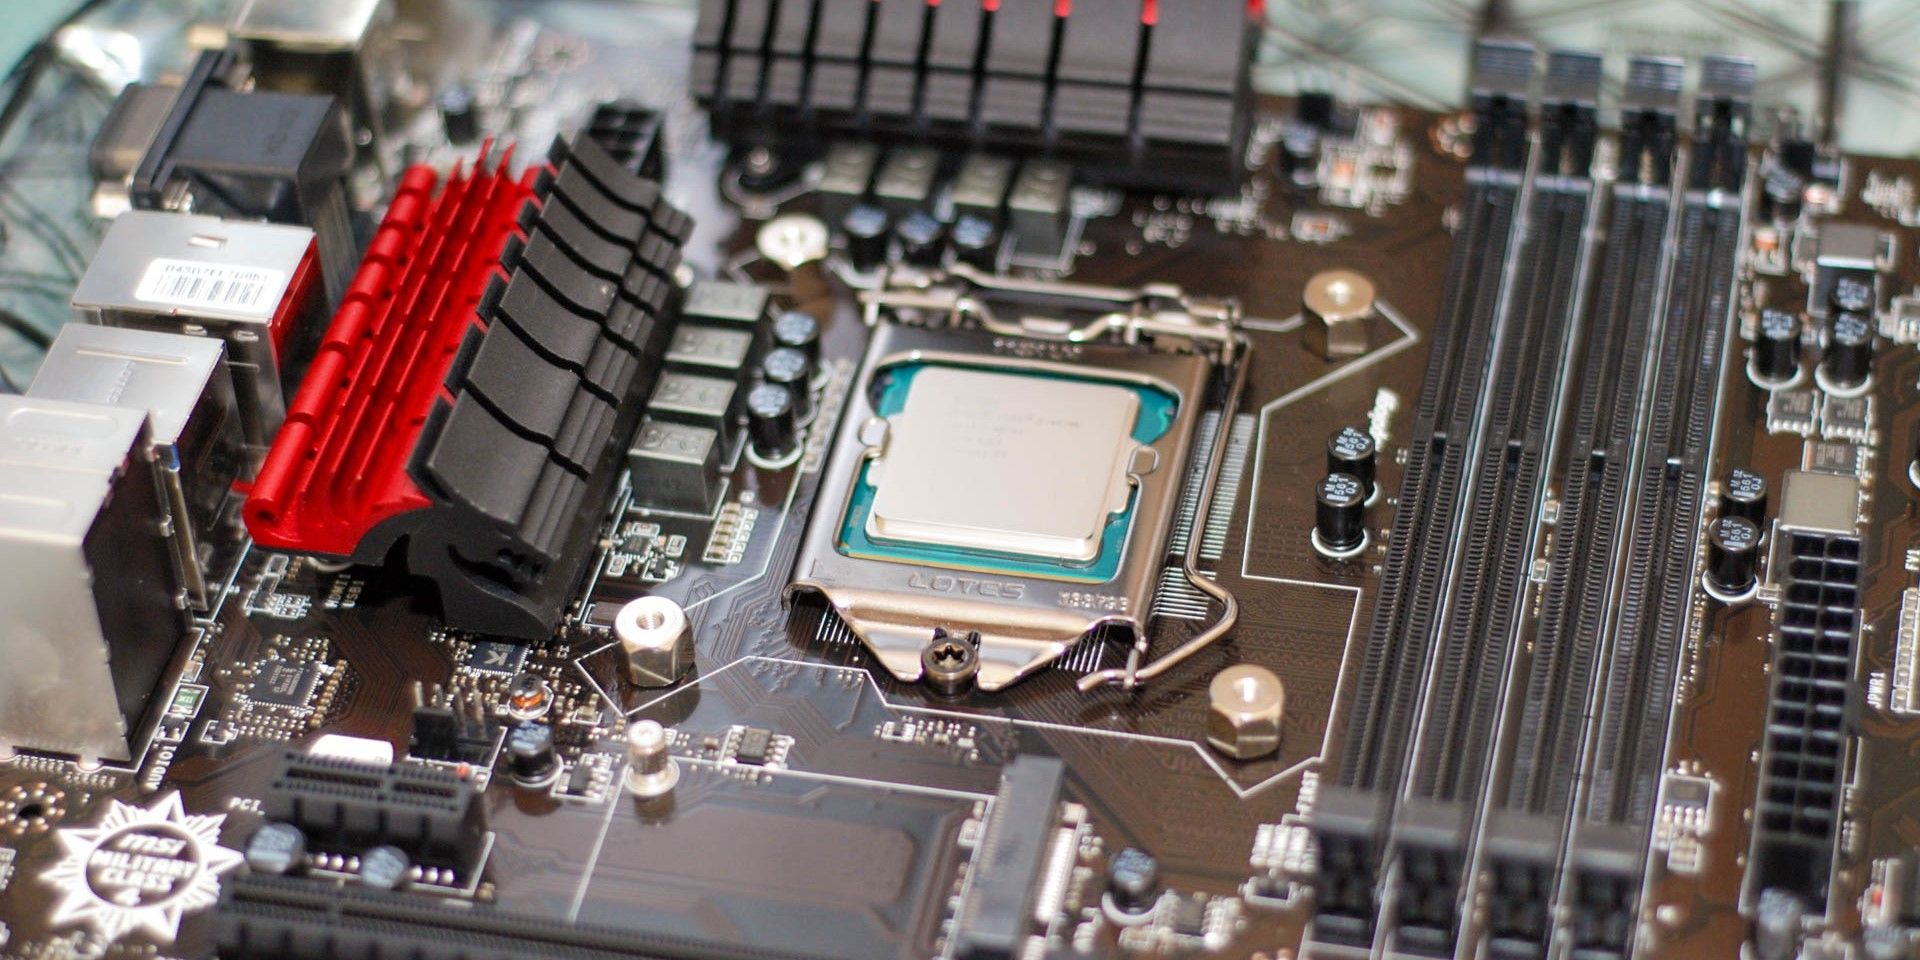 CPU chip on a MSI motherboard